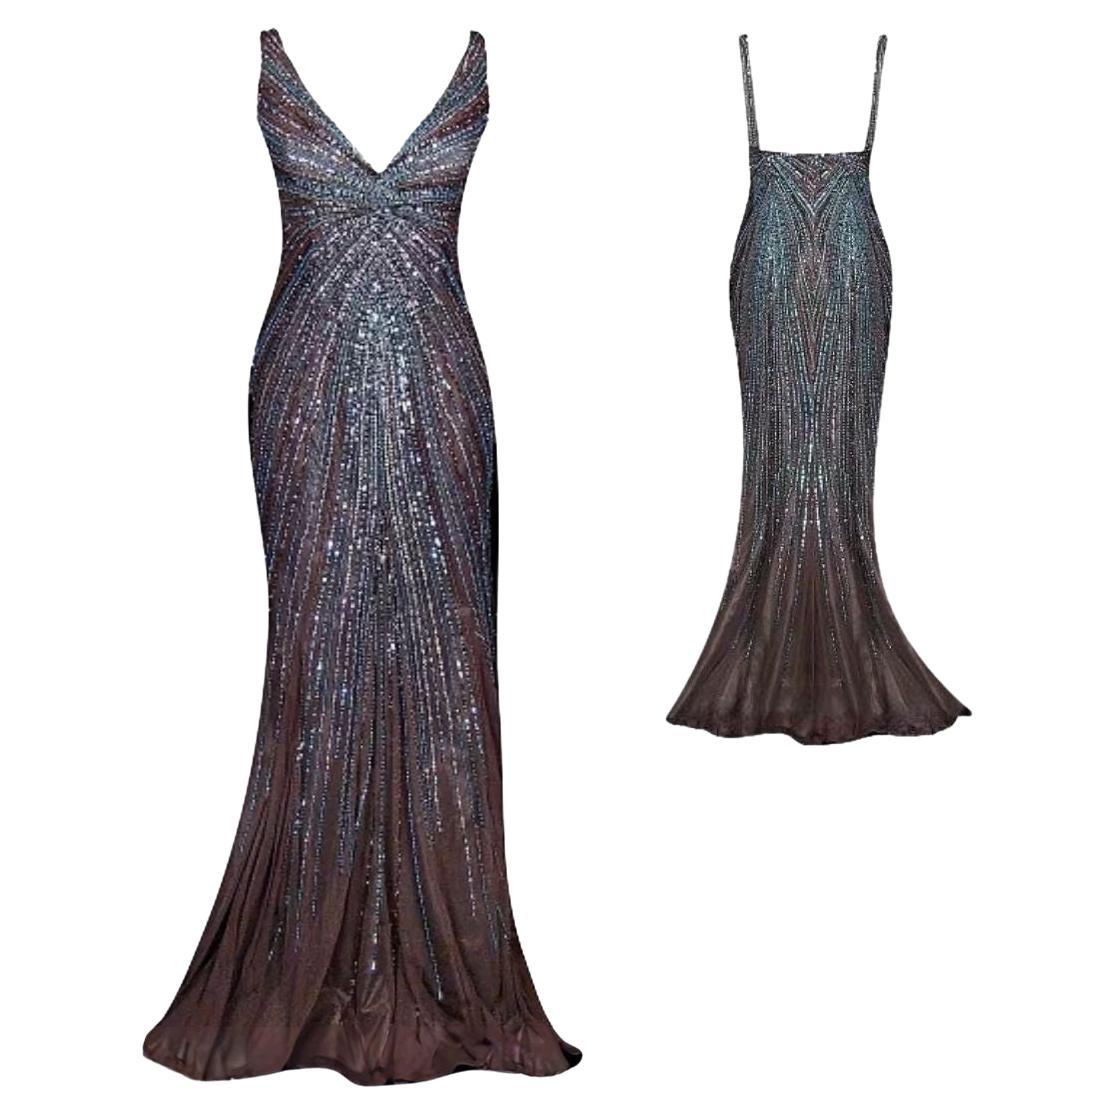 Gianni Versace Couture Vintage Sequin & Bead Embellished Evening Gown Size 42IT For Sale